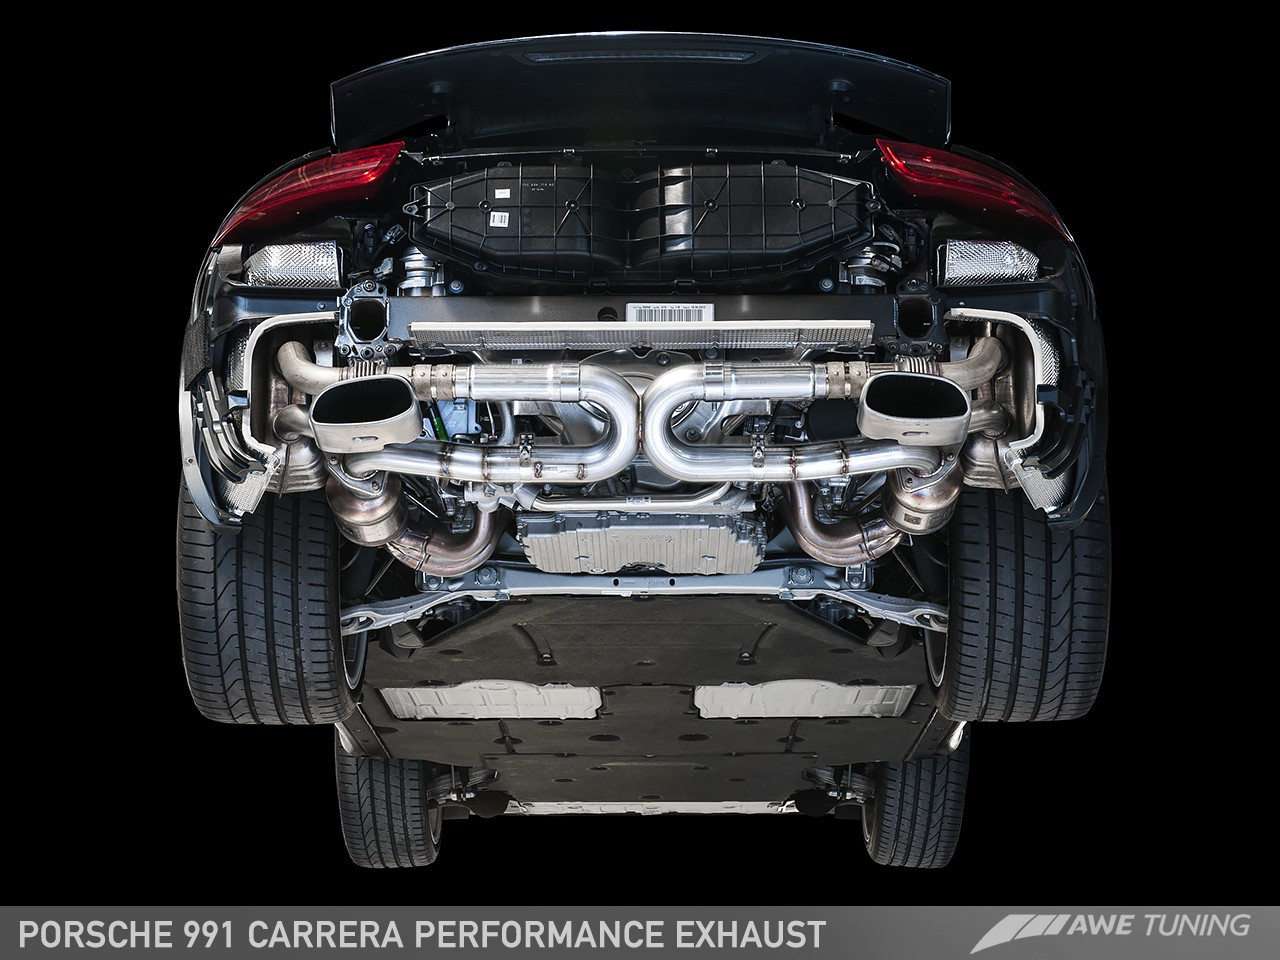 AWE Tuning Porsche 991 Carrera and Carrera 4 Performance Exhaust - Fitted with Original Tailpipe Trims